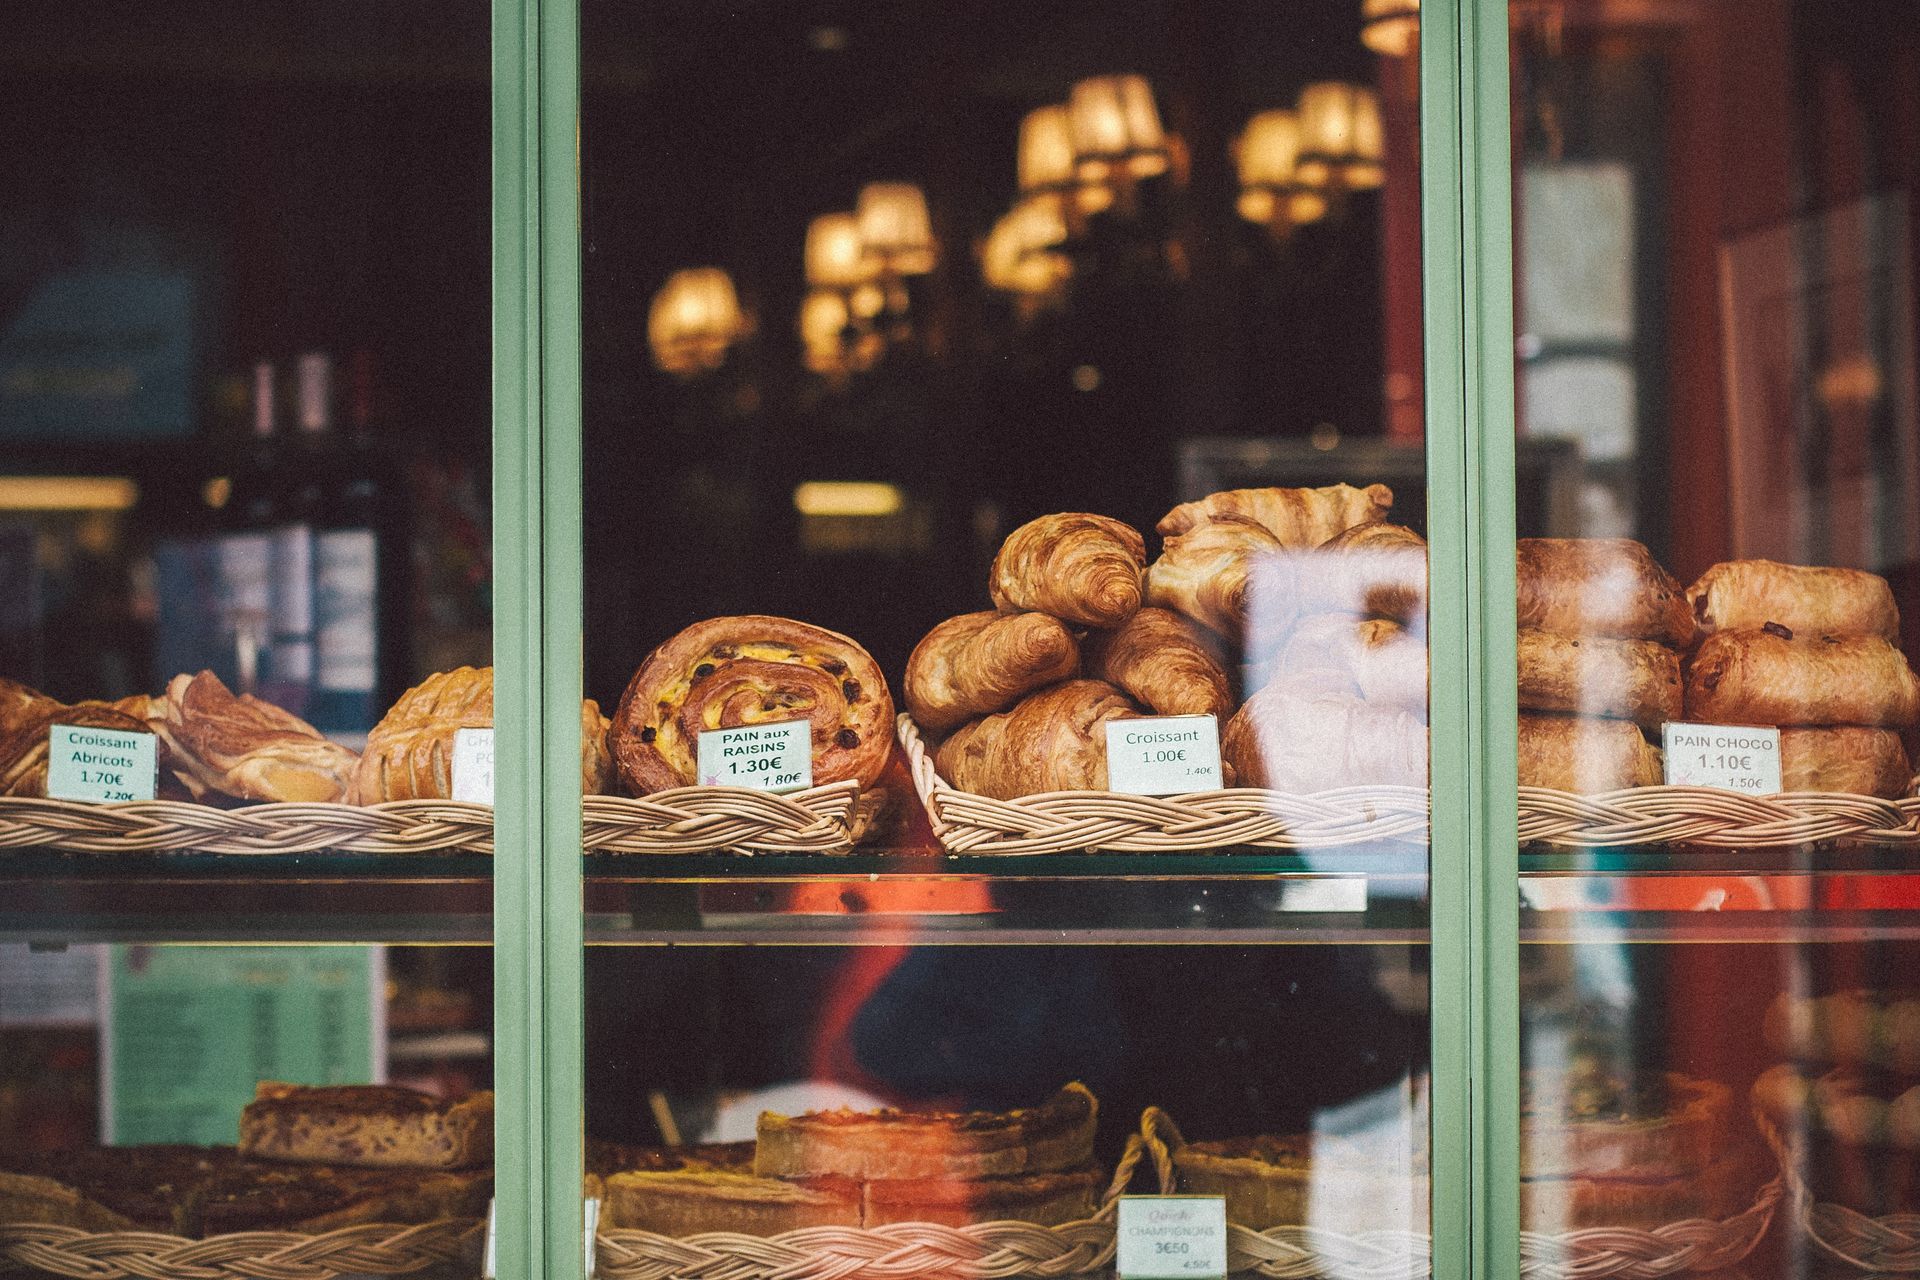 Late-Night Eats at a Boulangerie